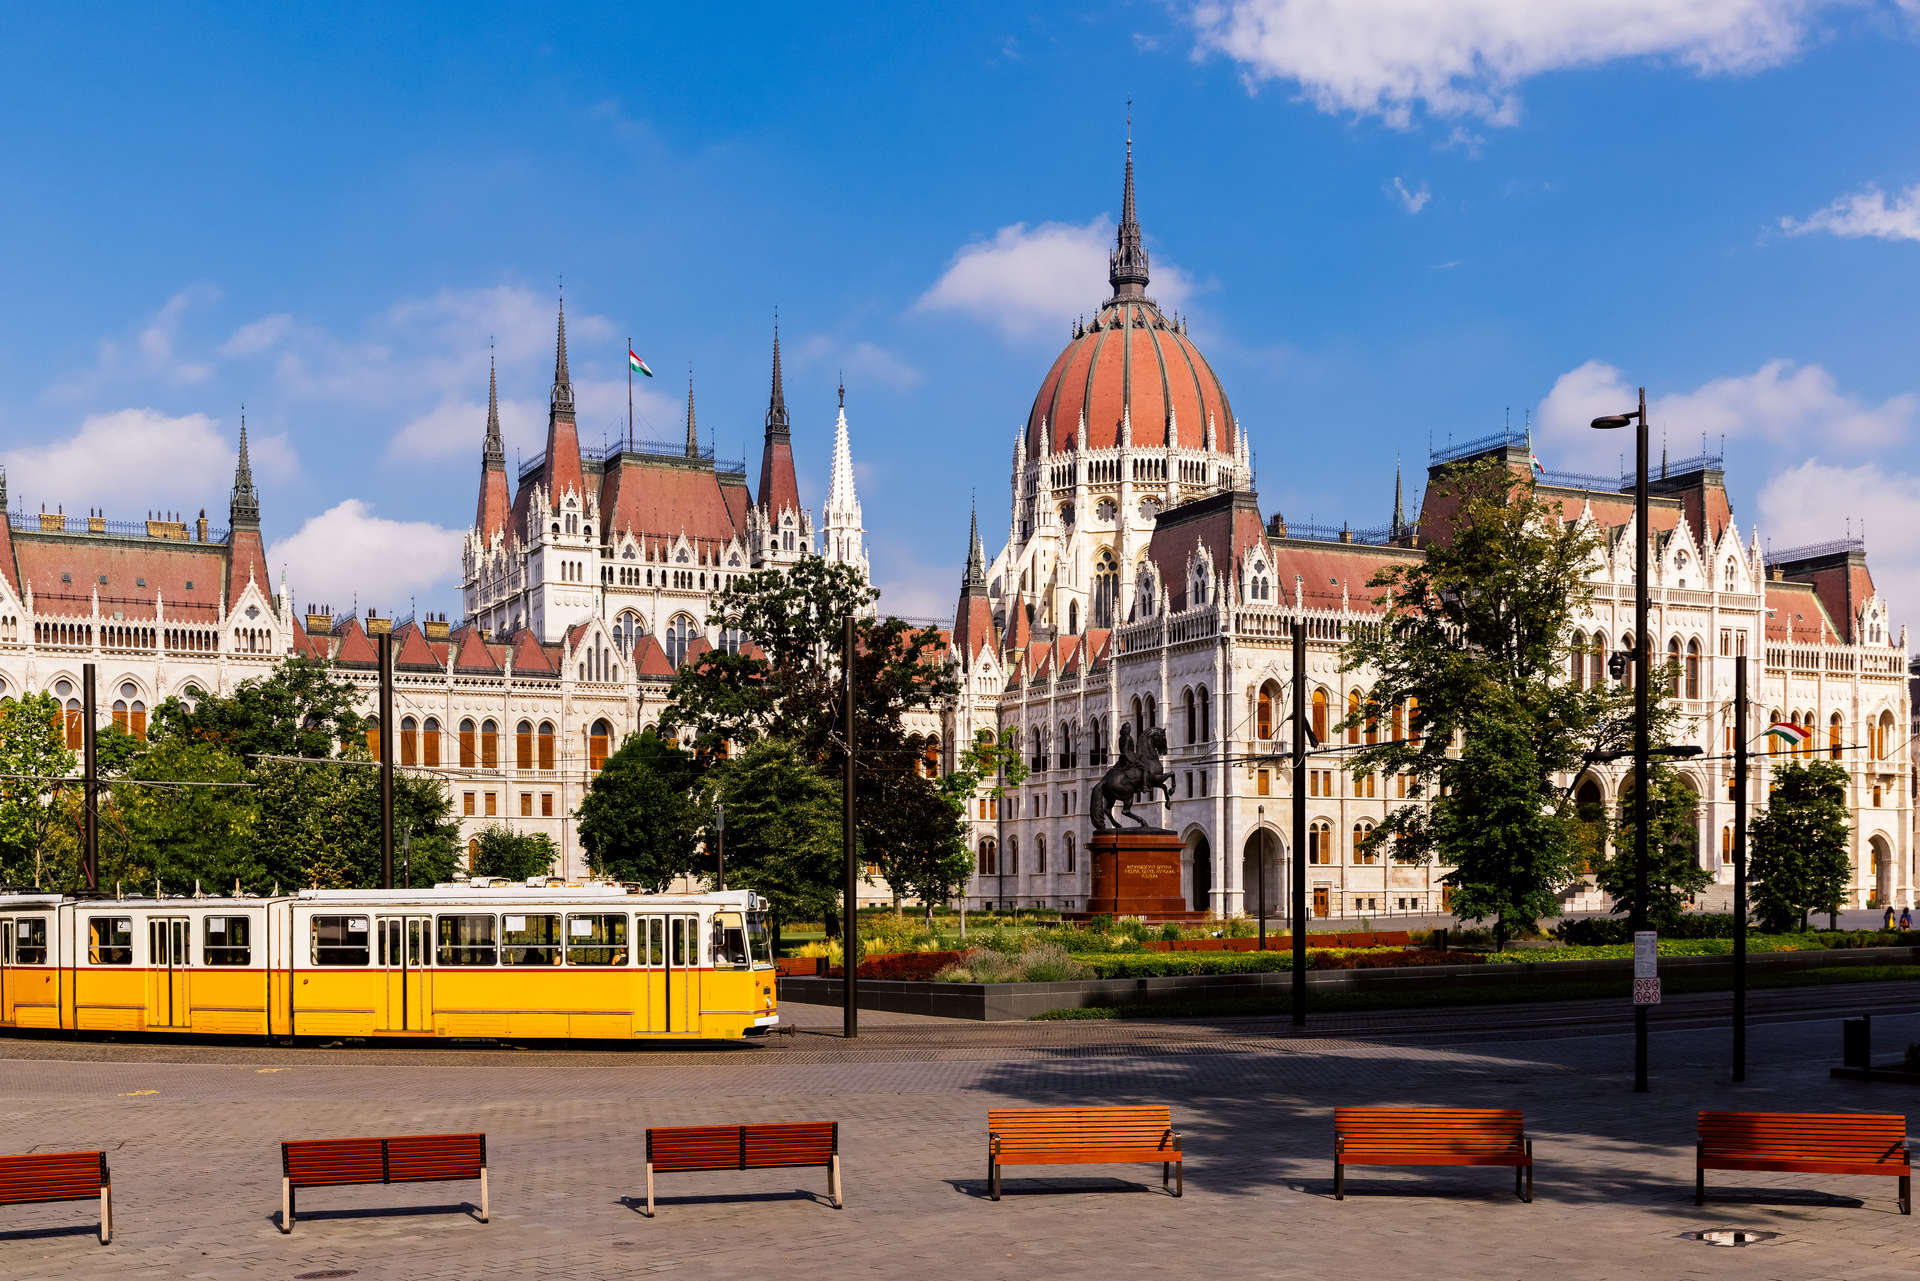 Hungarian Parliament and yellow tram in Budapest, Hungary